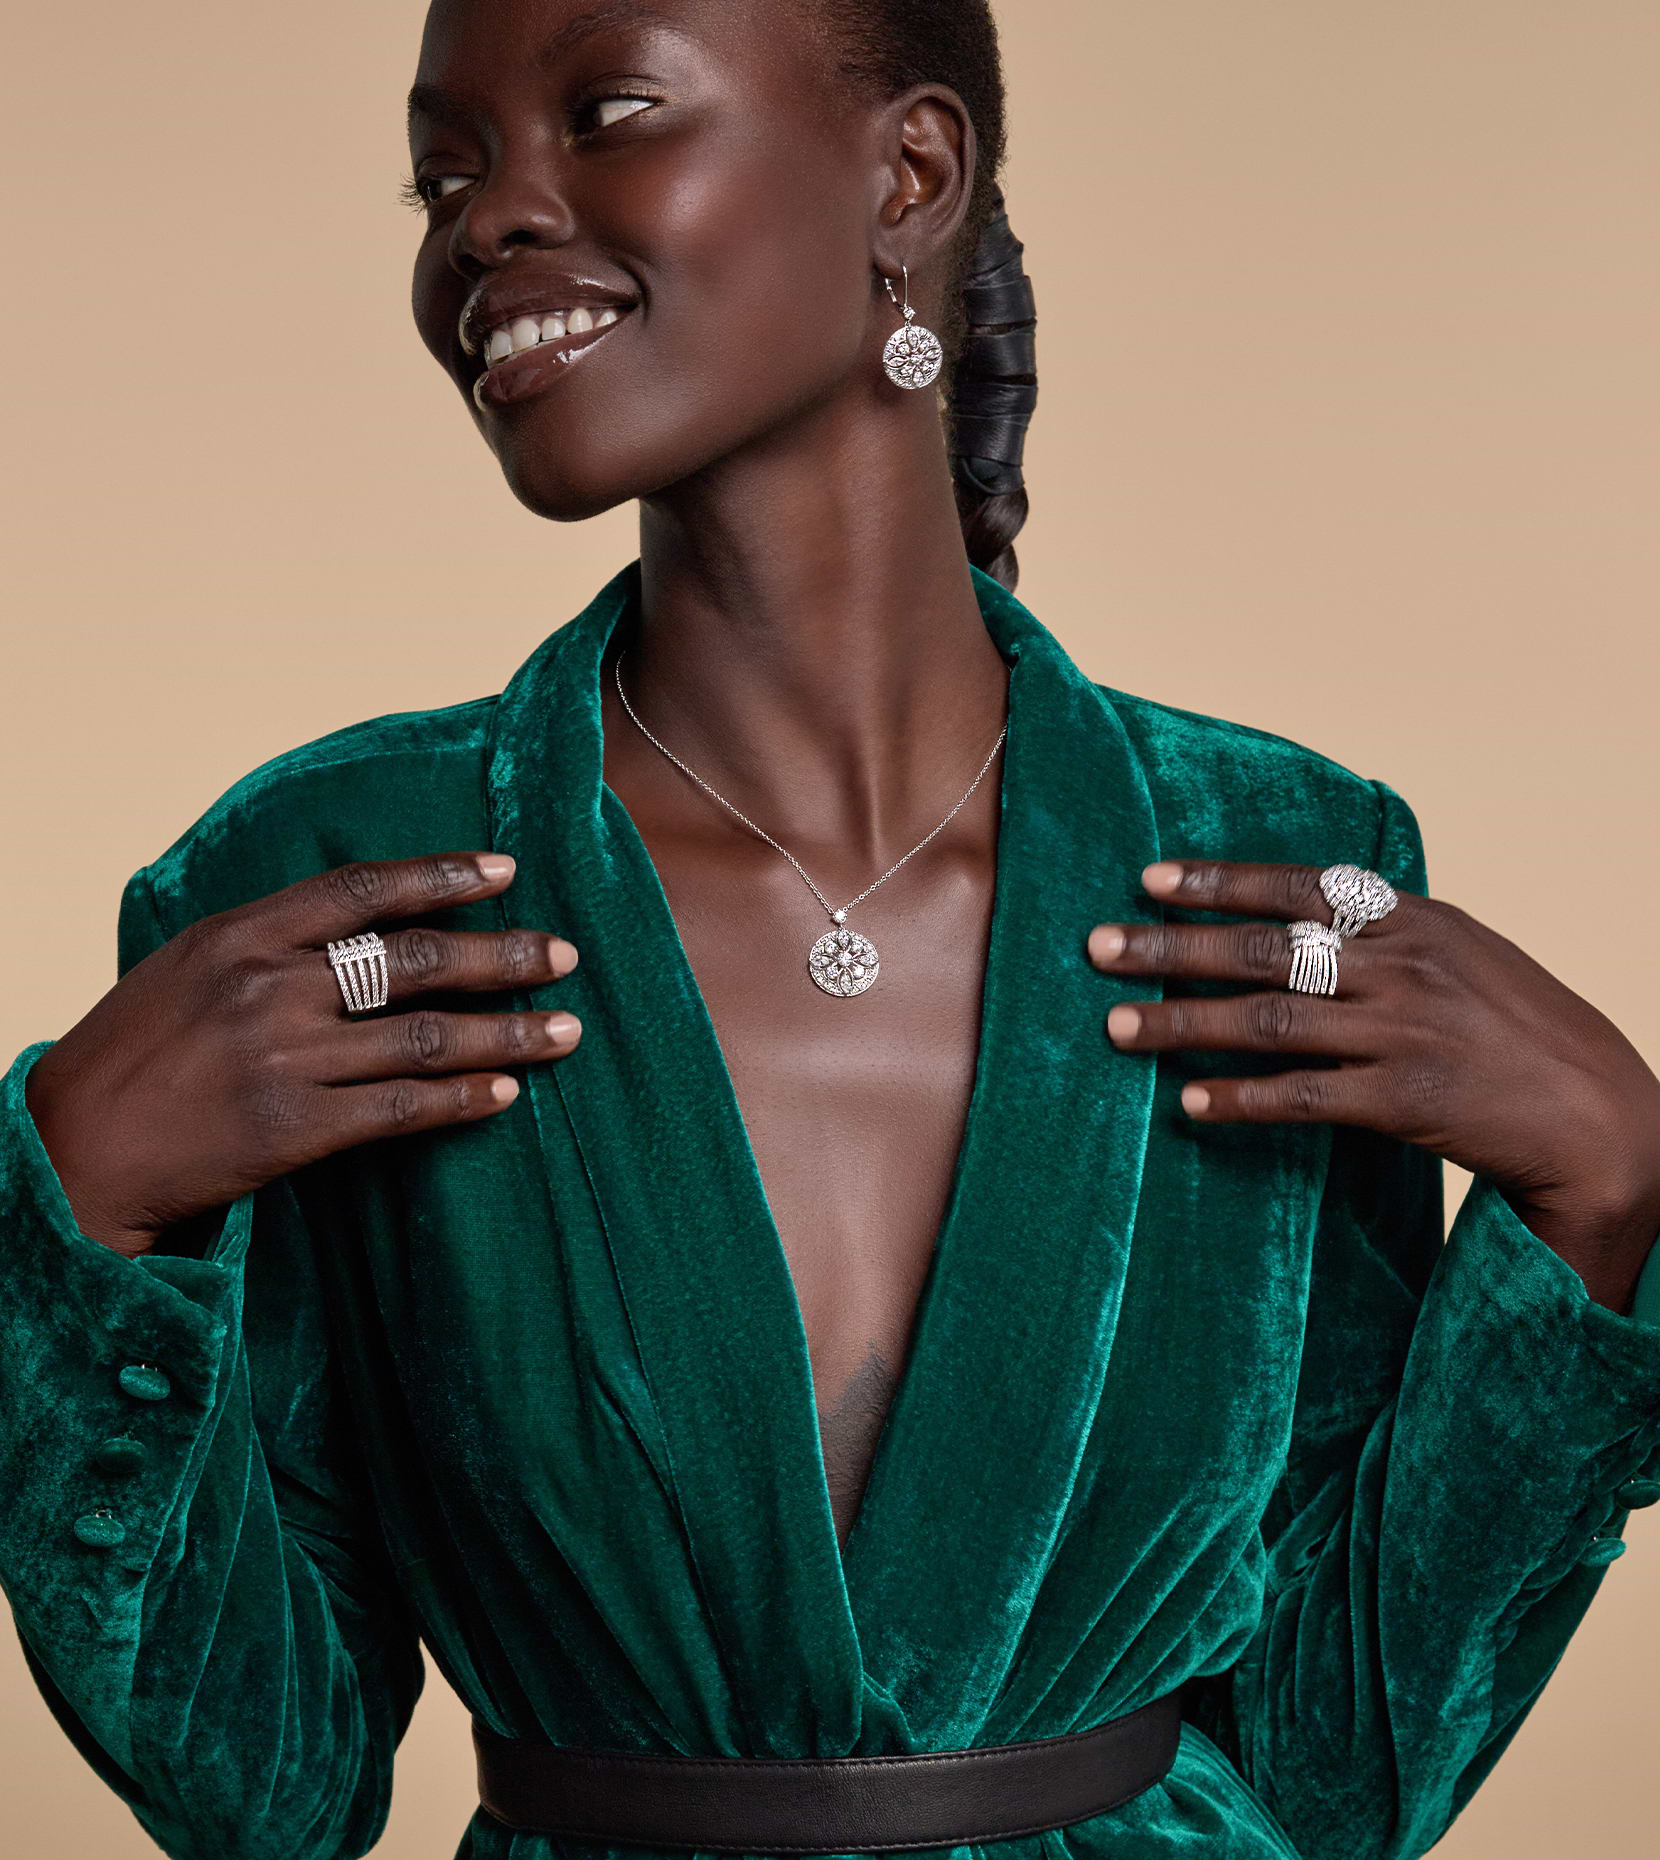 Image of smiling black woman with hands on either side of her chest featuring diamond earring, necklace, and rings